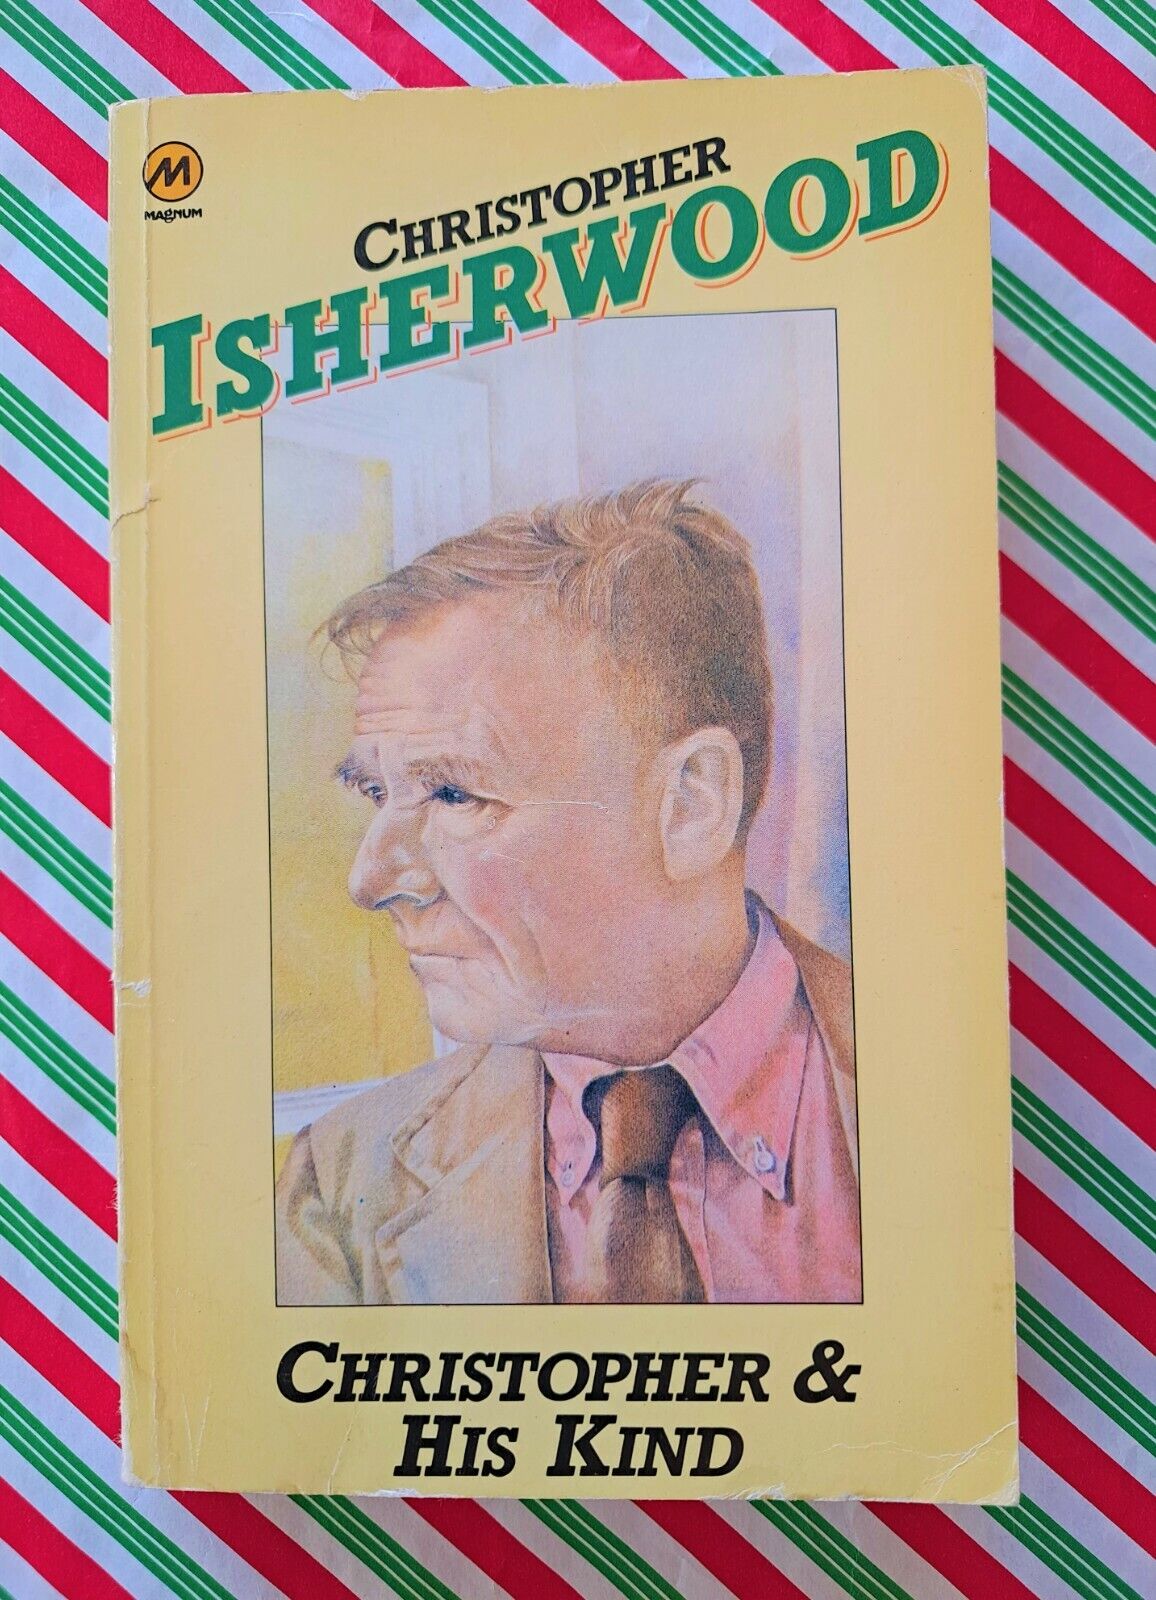 Christopher and His Kind by Christopher Isherwood (Author of Goodbye to Berlin)